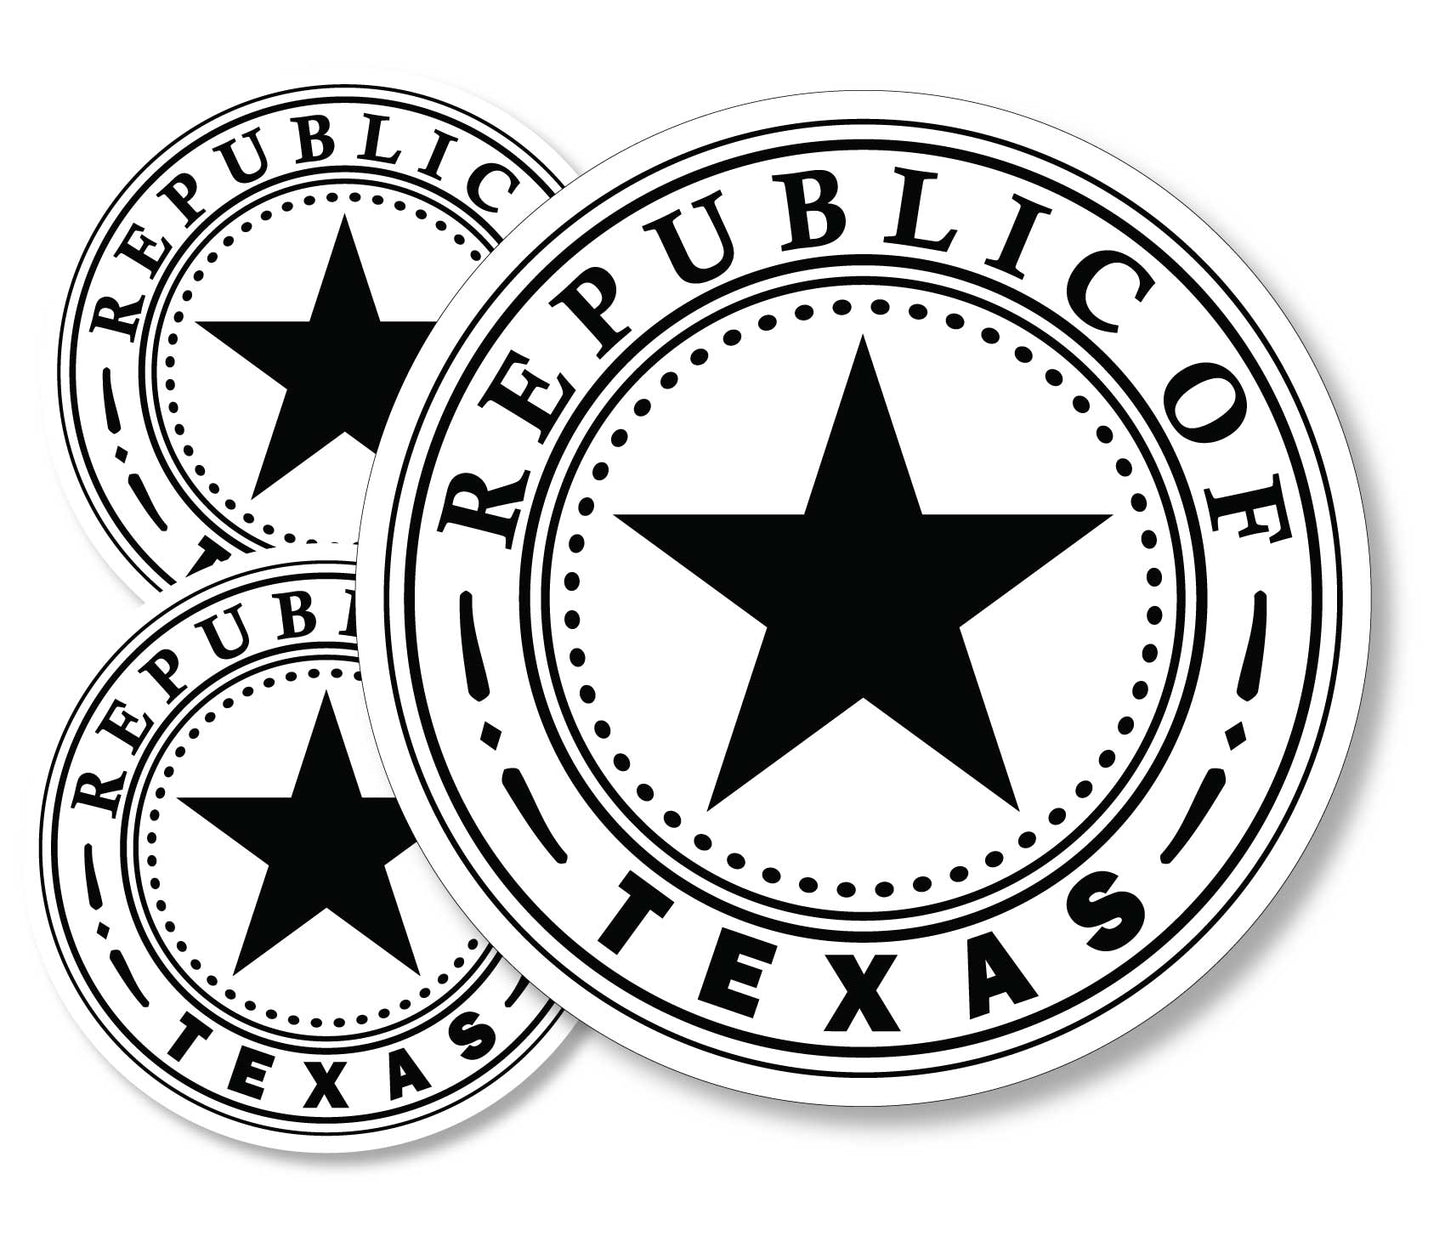 Republic of Texas Seal Decal (3 Pack) (5" and 3")